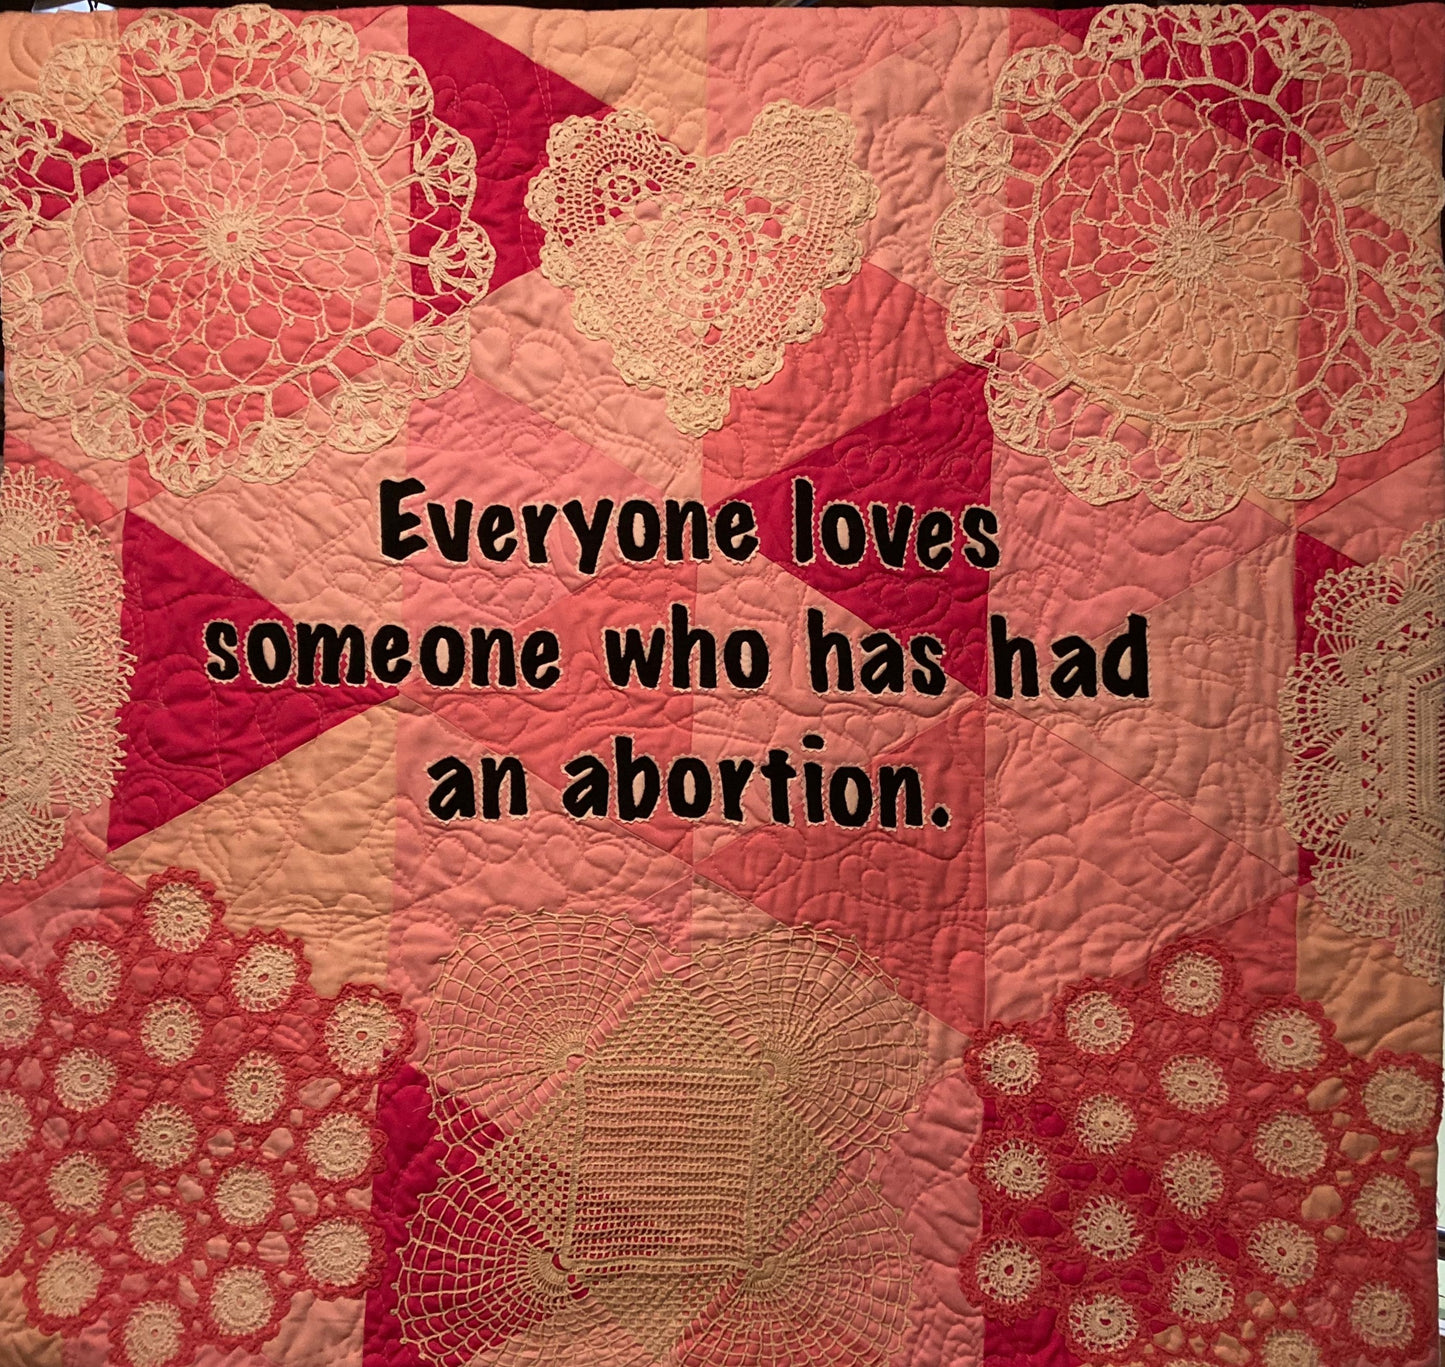 Women’s Work Abortion Rights Series: Everyone loves someone..